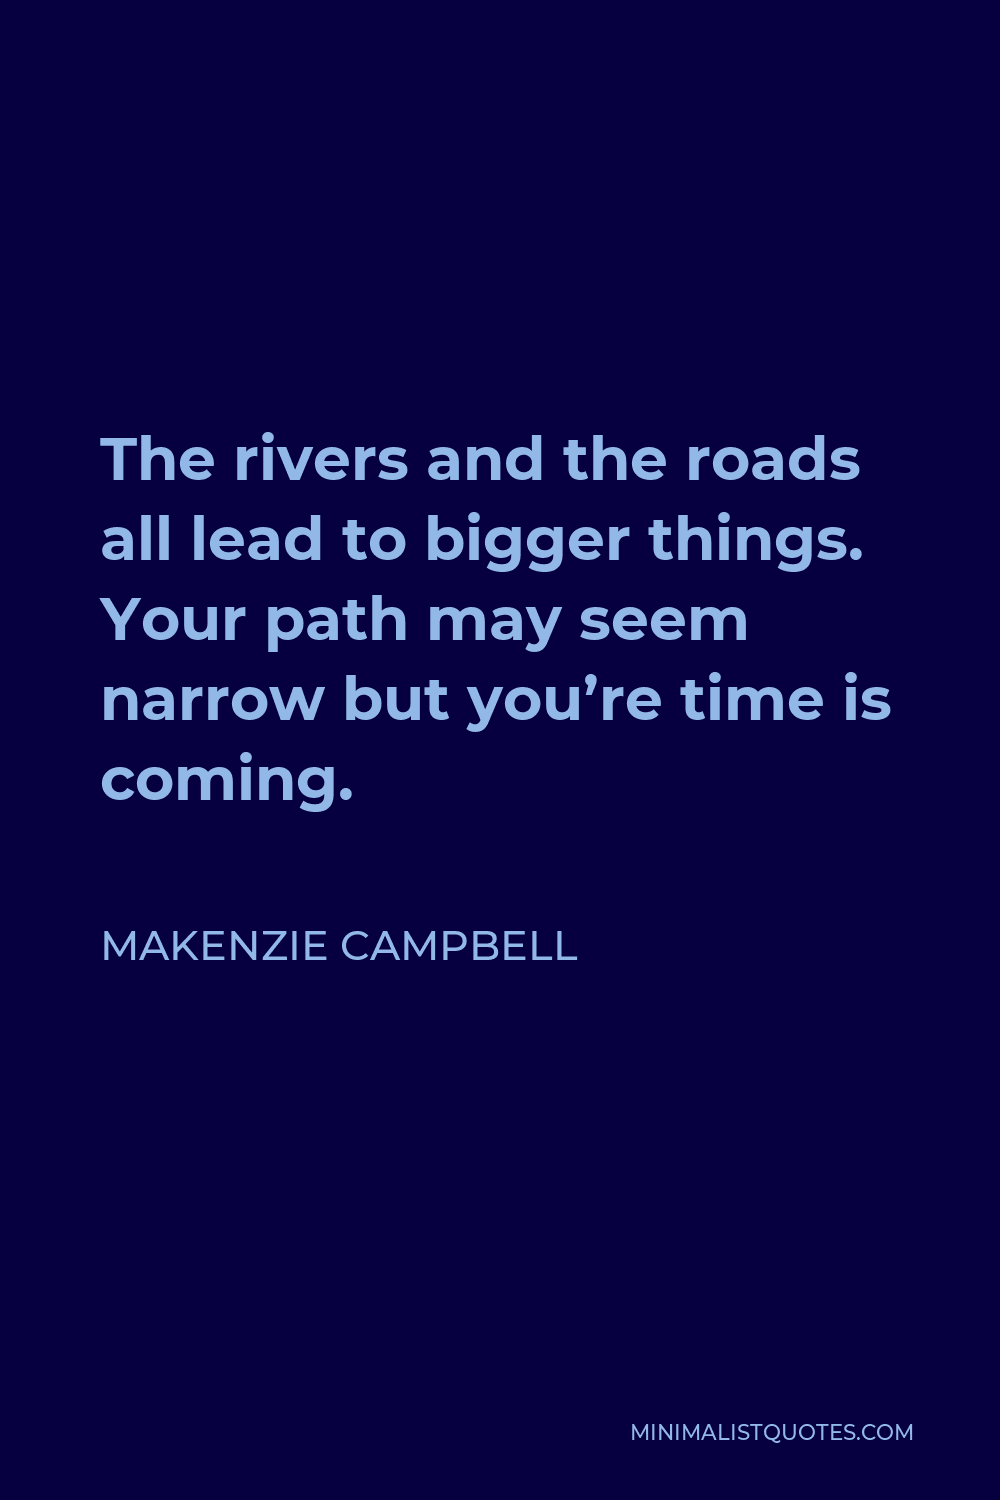 Makenzie Campbell Quote - The rivers and the roads all lead to bigger things. Your path may seem narrow but you’re time is coming.